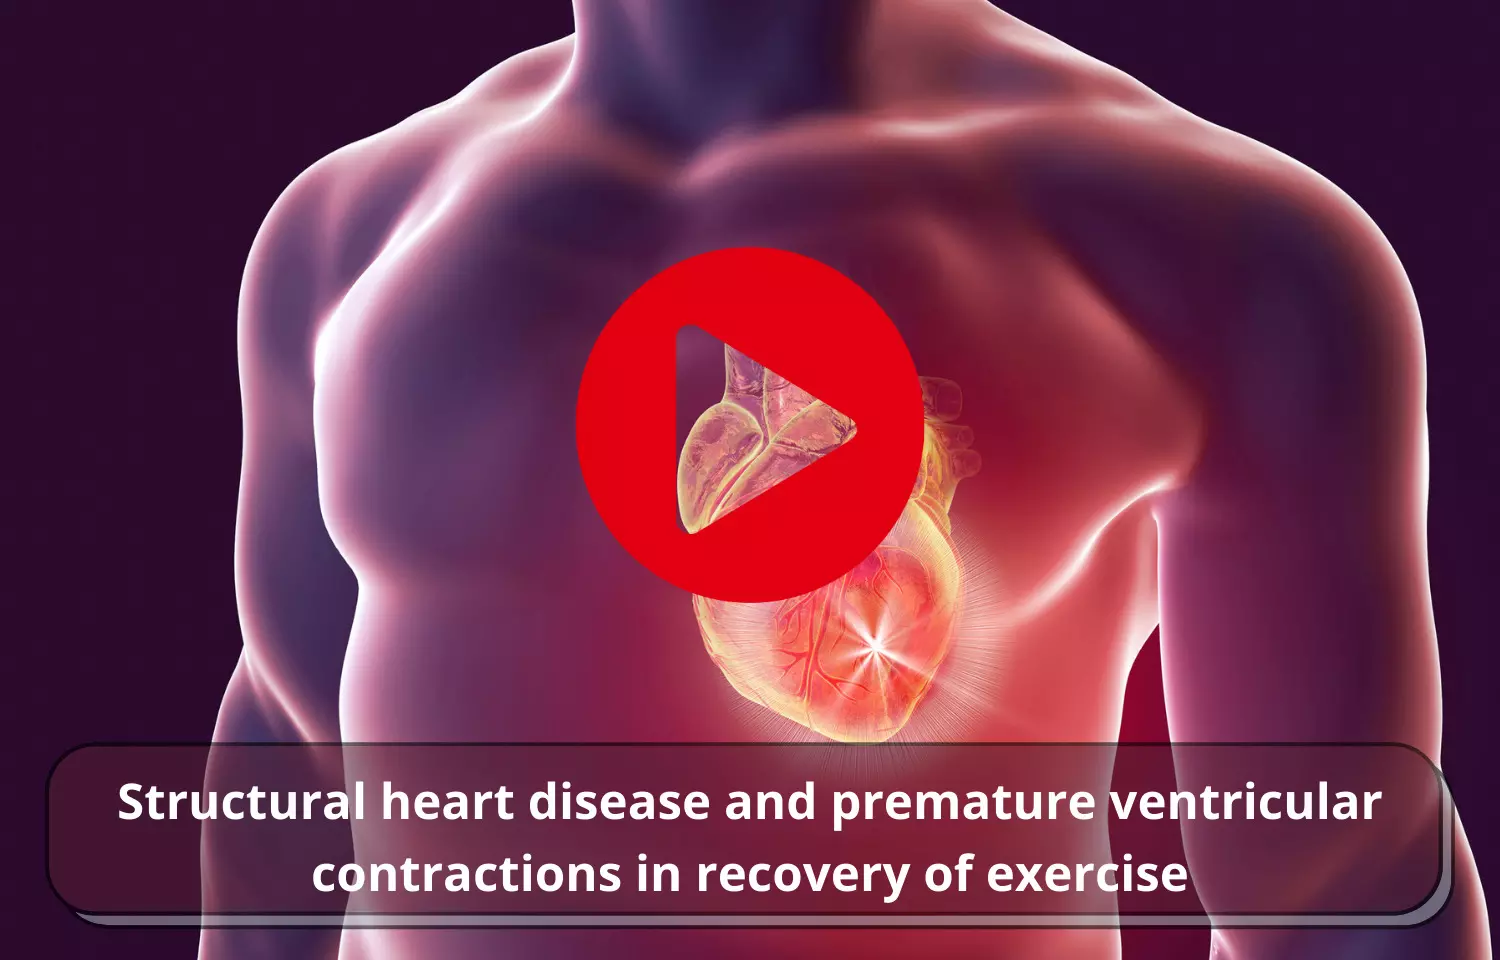 Structural heart disease and premature ventricular contractions in recovery of exercise